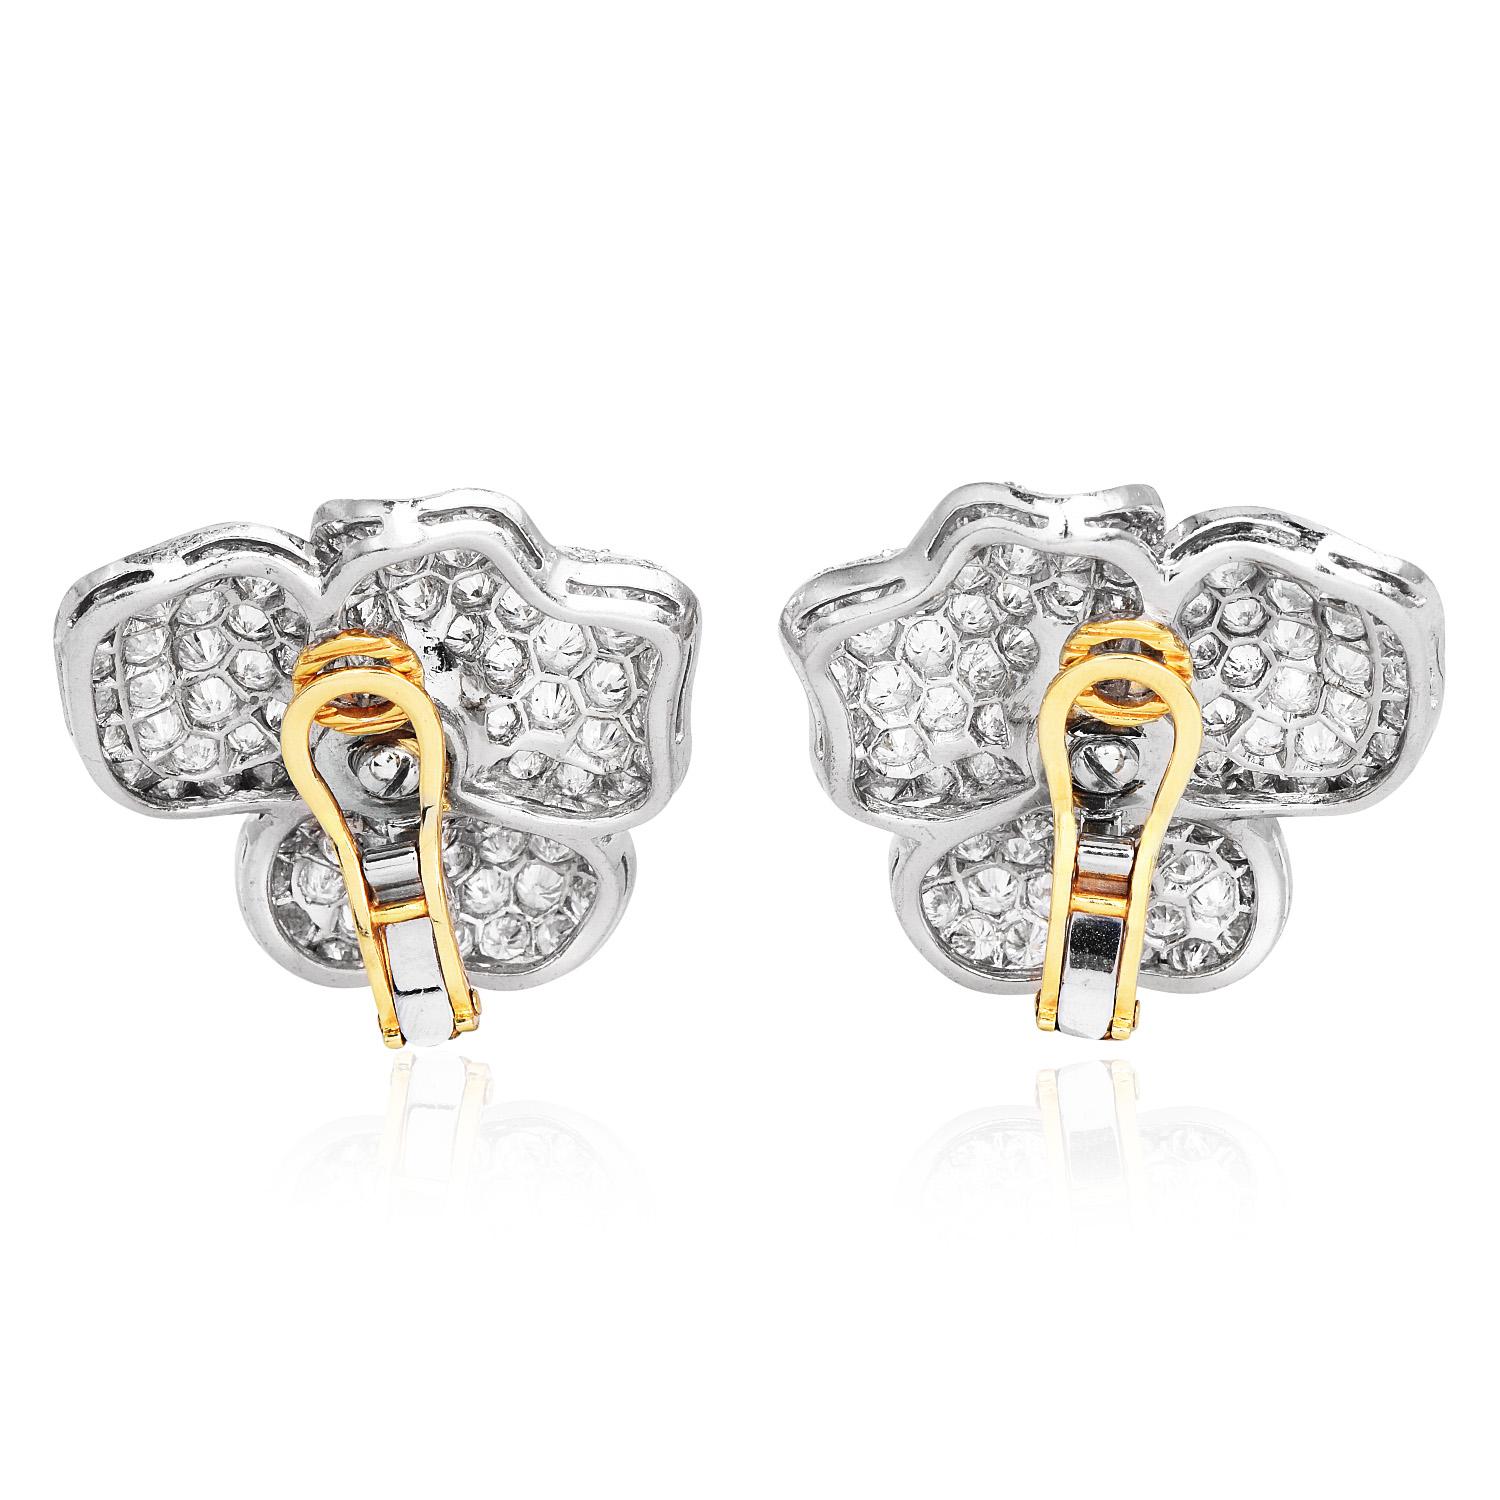 22.76 Carats Yellow Diamond 18K Gold Flower Cluster Large Clip On Earrings In Excellent Condition For Sale In Miami, FL